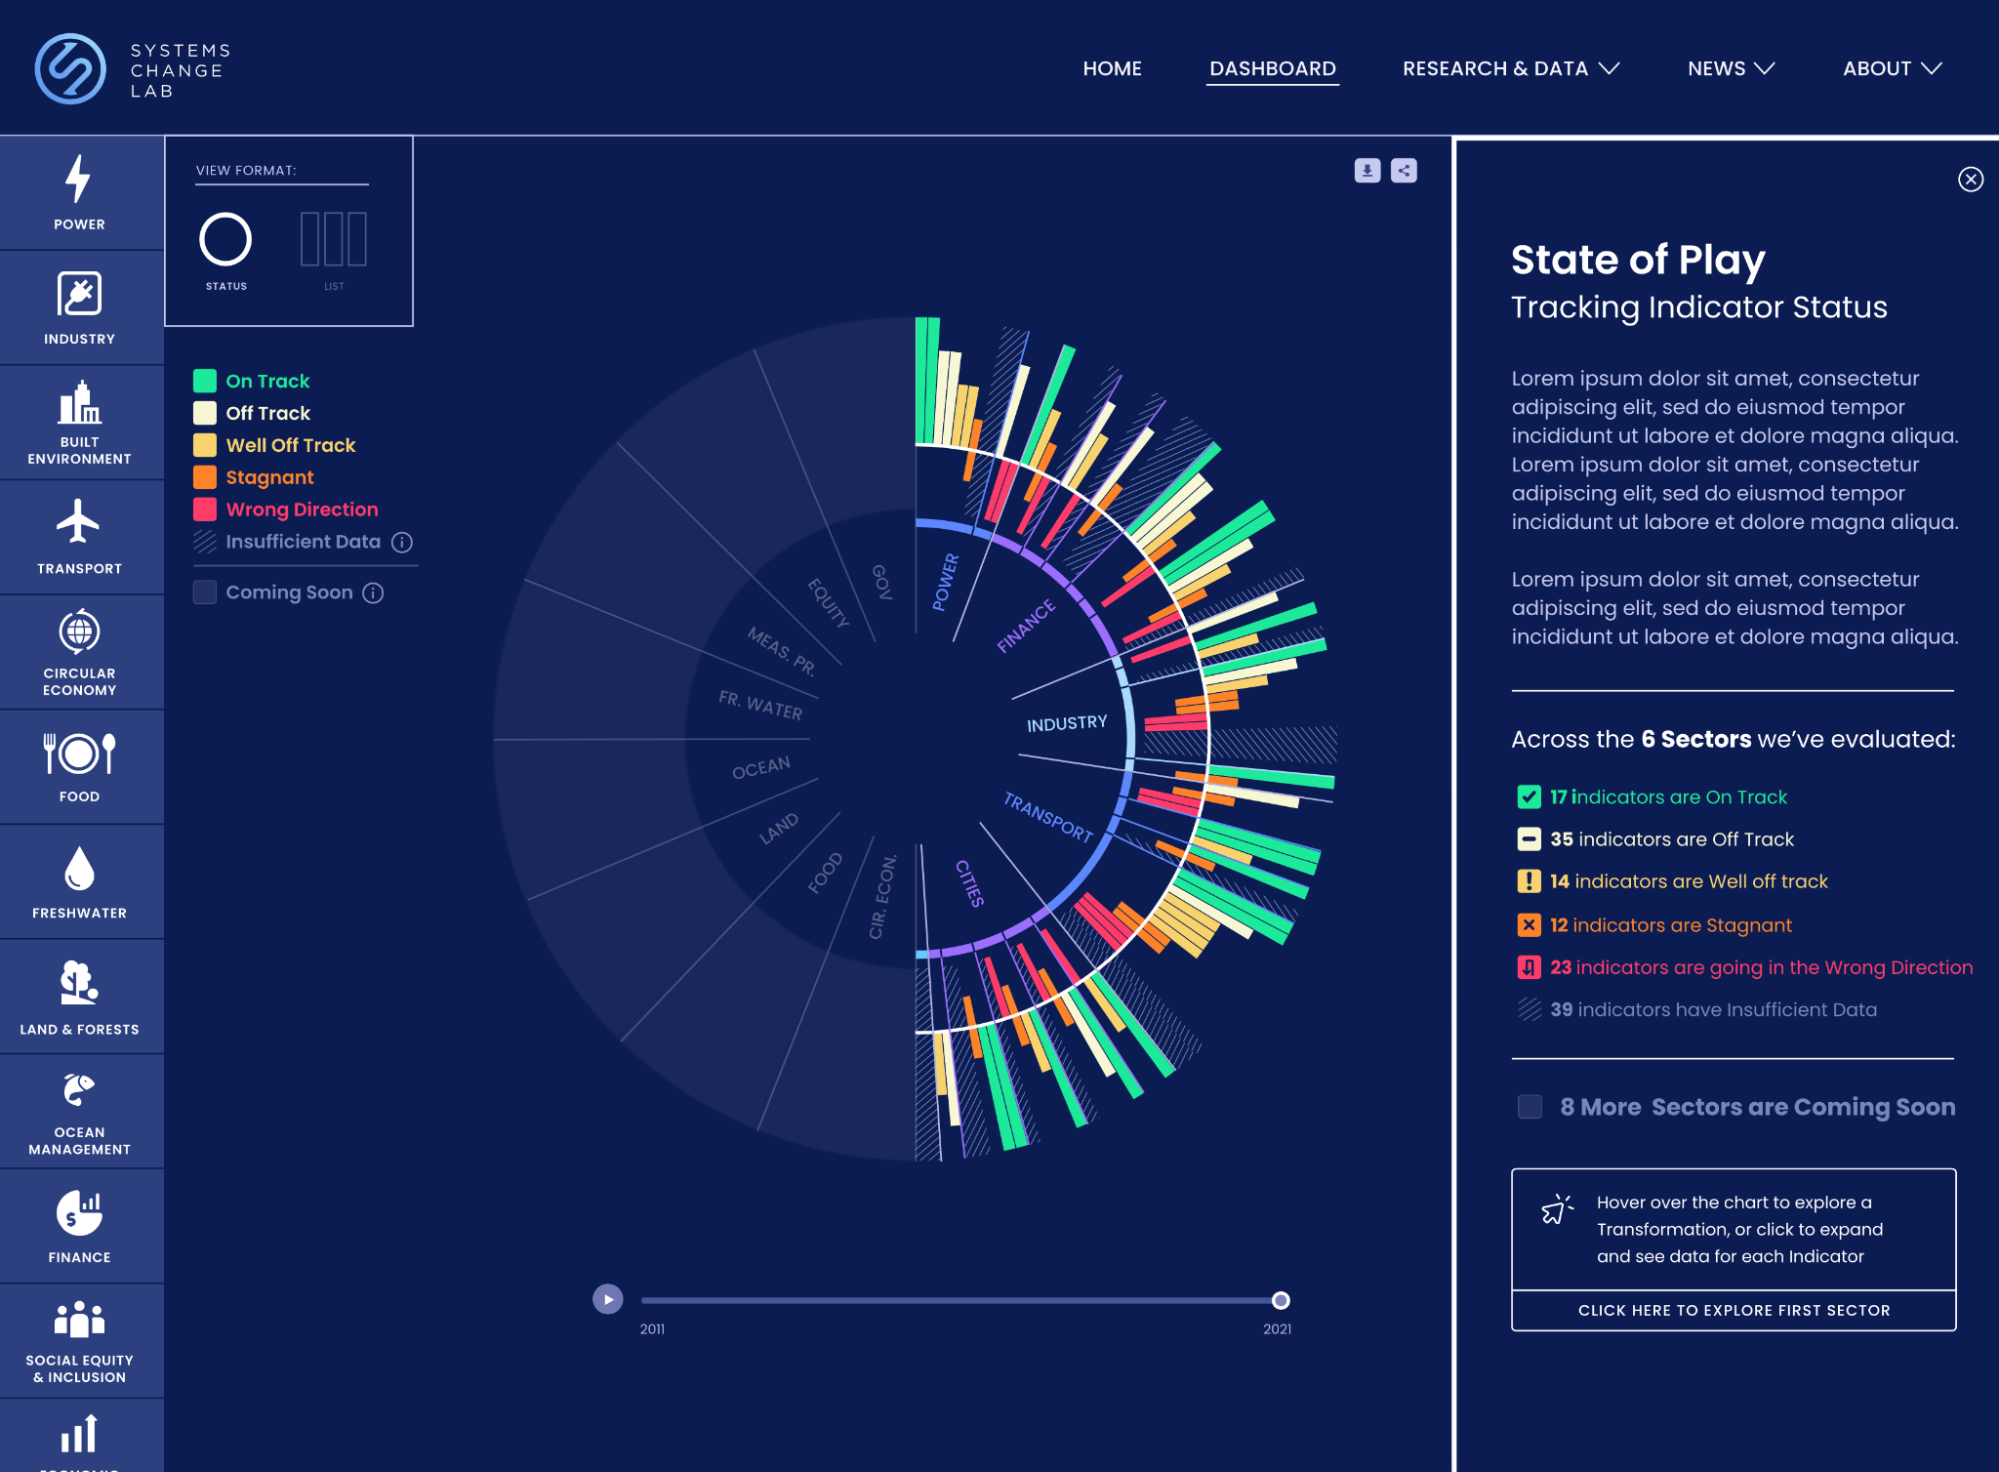 A radial diagram showcasing hundreds of indicators, used to track progress on solving the climate crisis. Designed by Graphicacy for World Resources Institute, as part of their Systems Change Lab data platform